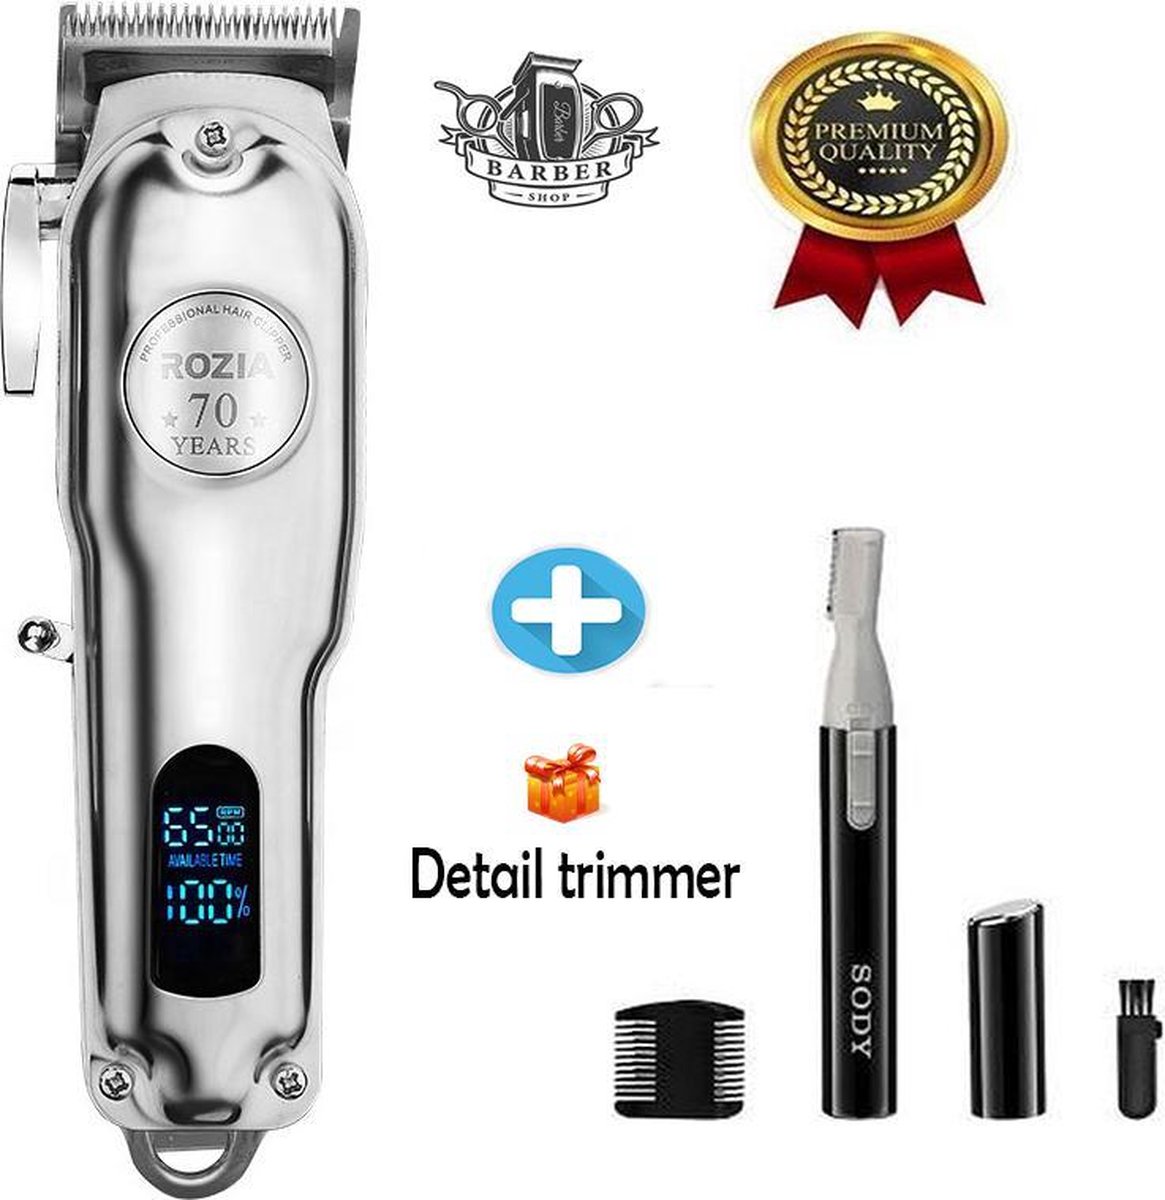 Rozia HQ2208 PRO Professionele Tondeuse mannen- Draadloos - Kapper - Haartrimmer -Detail Trimmer - Trimmer - Baardtrimmer -Tondeuse mannen hoofdhaar - Scheerapparaat -Tondeuse - Incl. Precisietrimmers